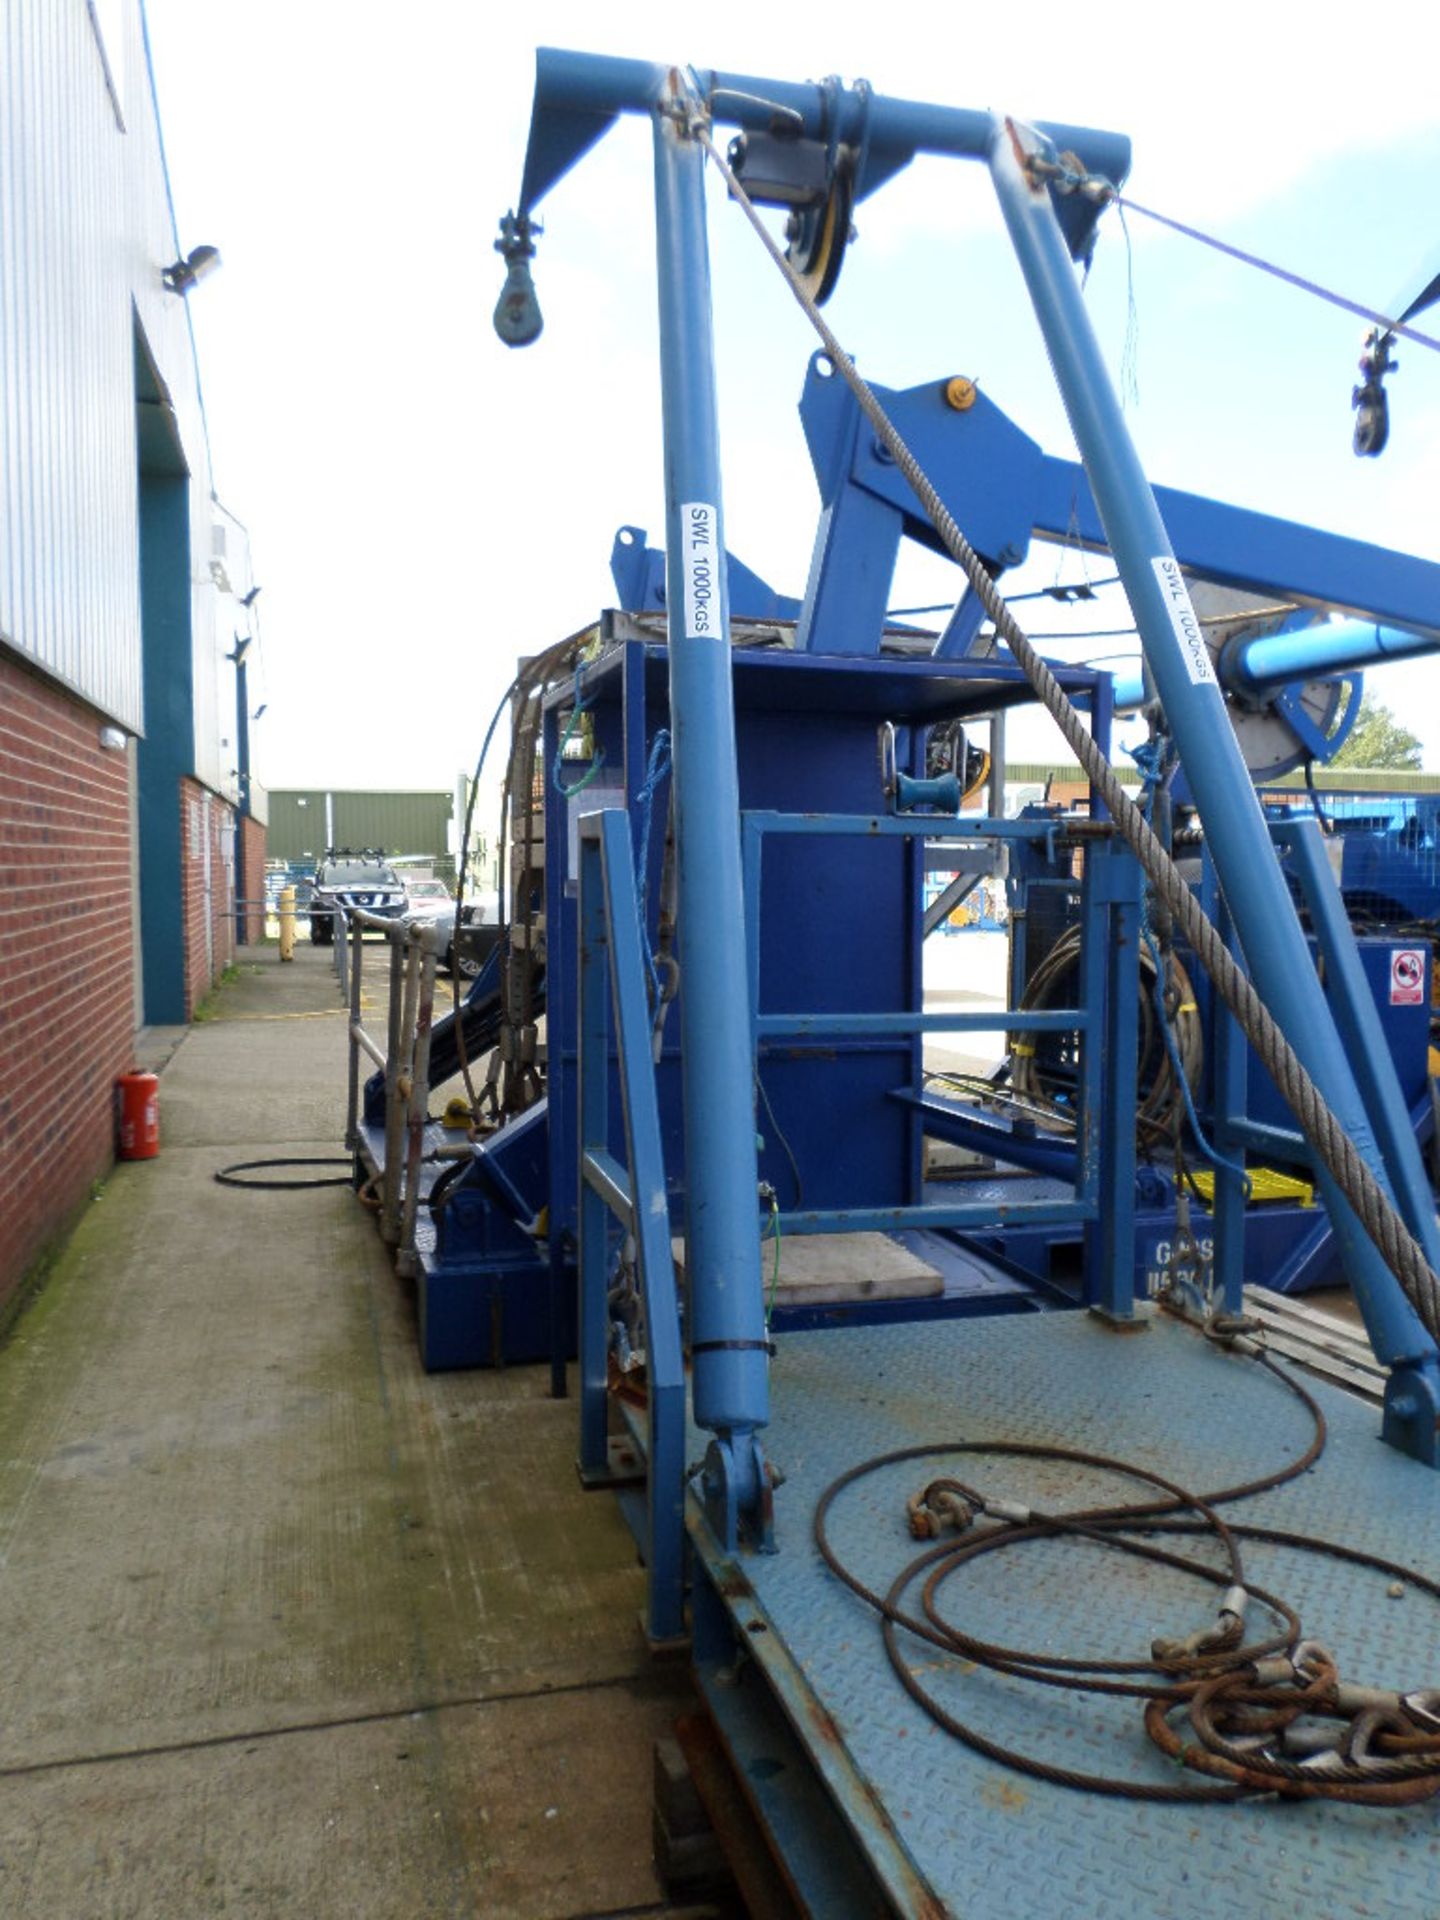 Aquanos 1000kg diver deployment frame, IMCA Compliant, reference No R7M 06 DF fitted with 2 x Braden - Image 2 of 5